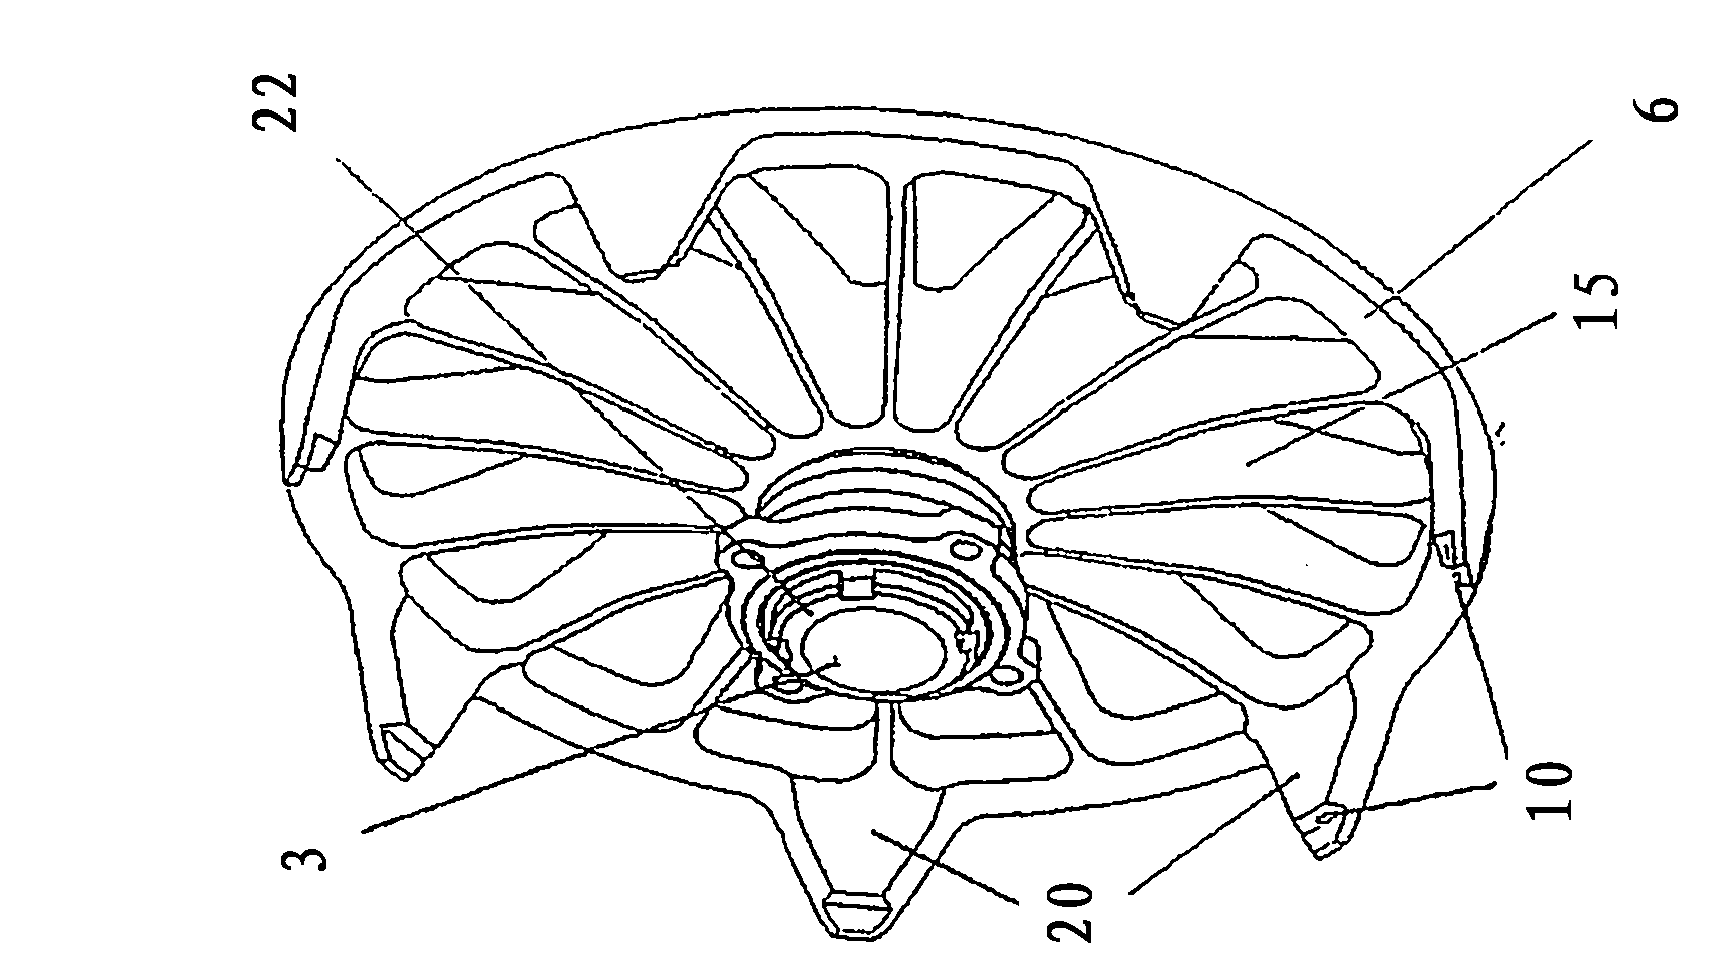 Wheel assembly for motor vehicle